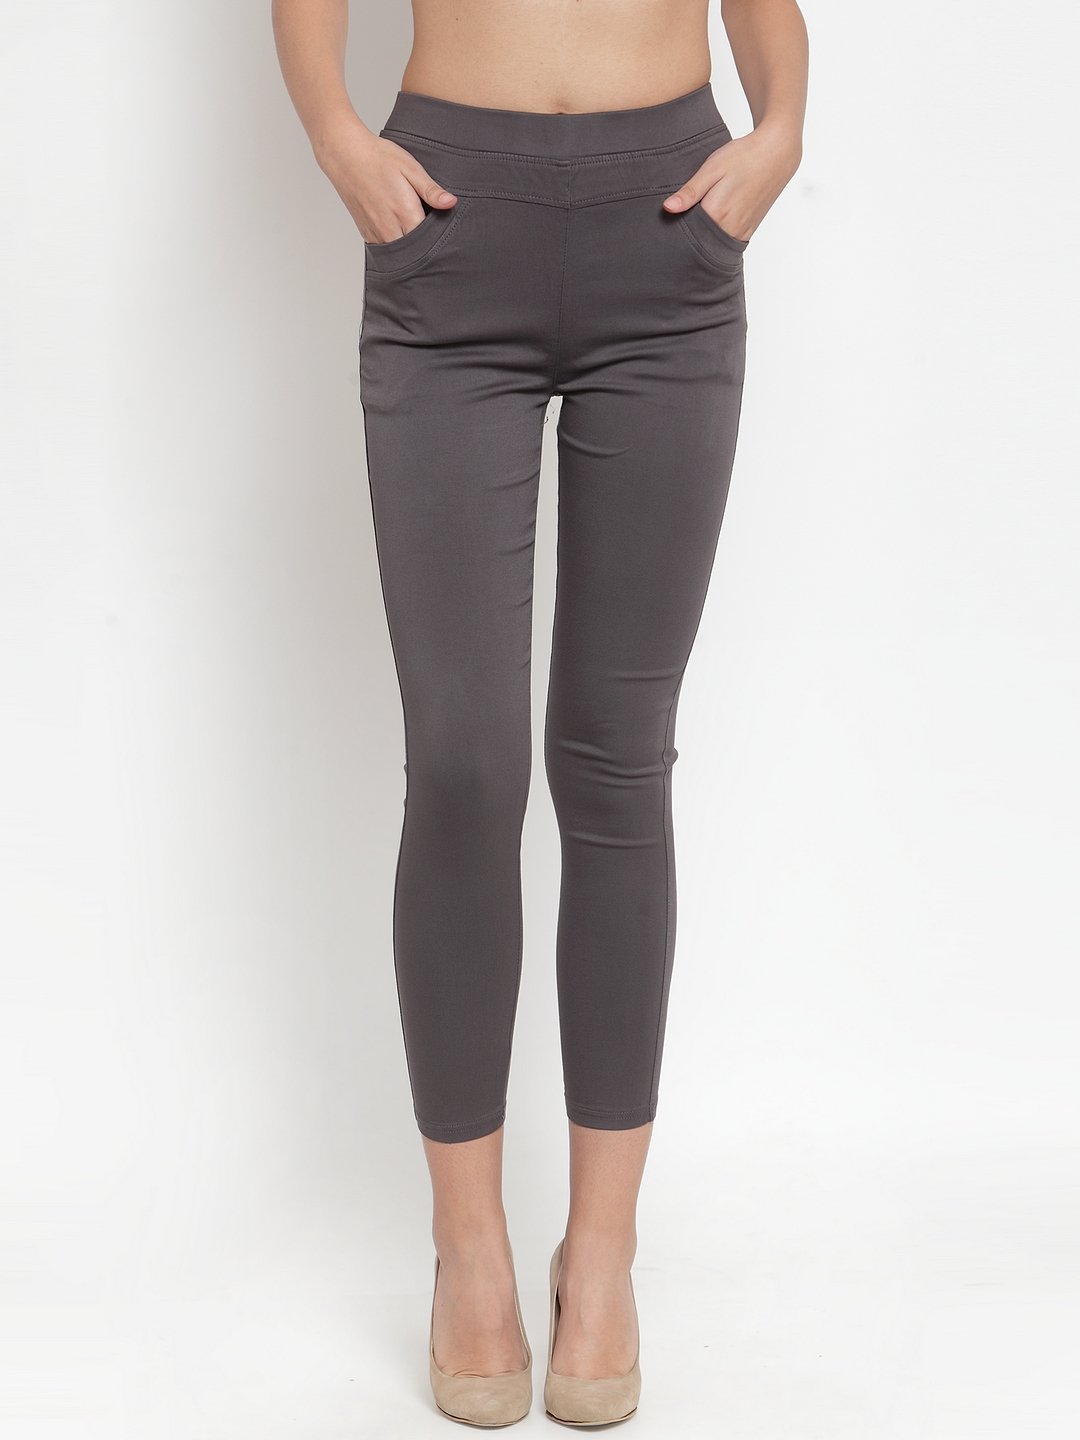 Buy online High Rise Solid Jeggings from Jeans & jeggings for